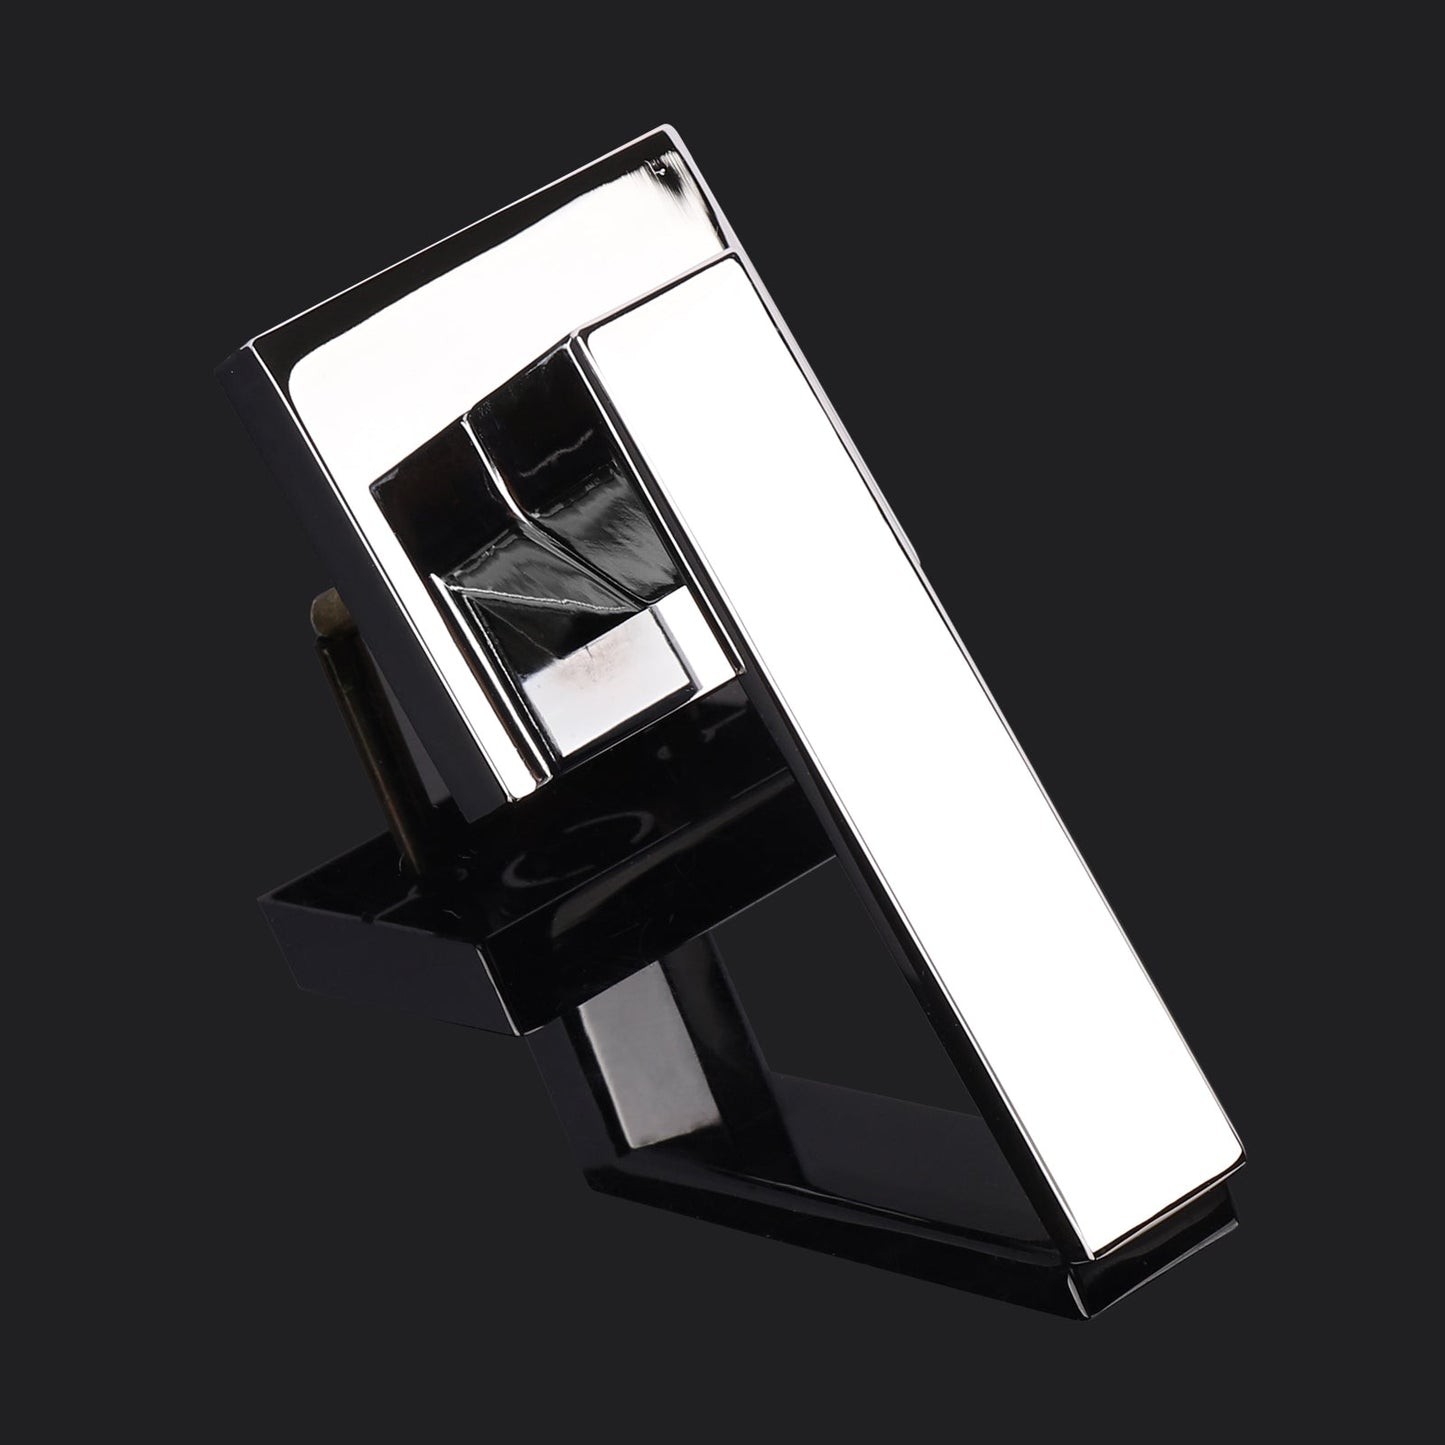 Heavy Duty Door Handles with Square Design Polished Chrome Finish DL01PC - Probrico